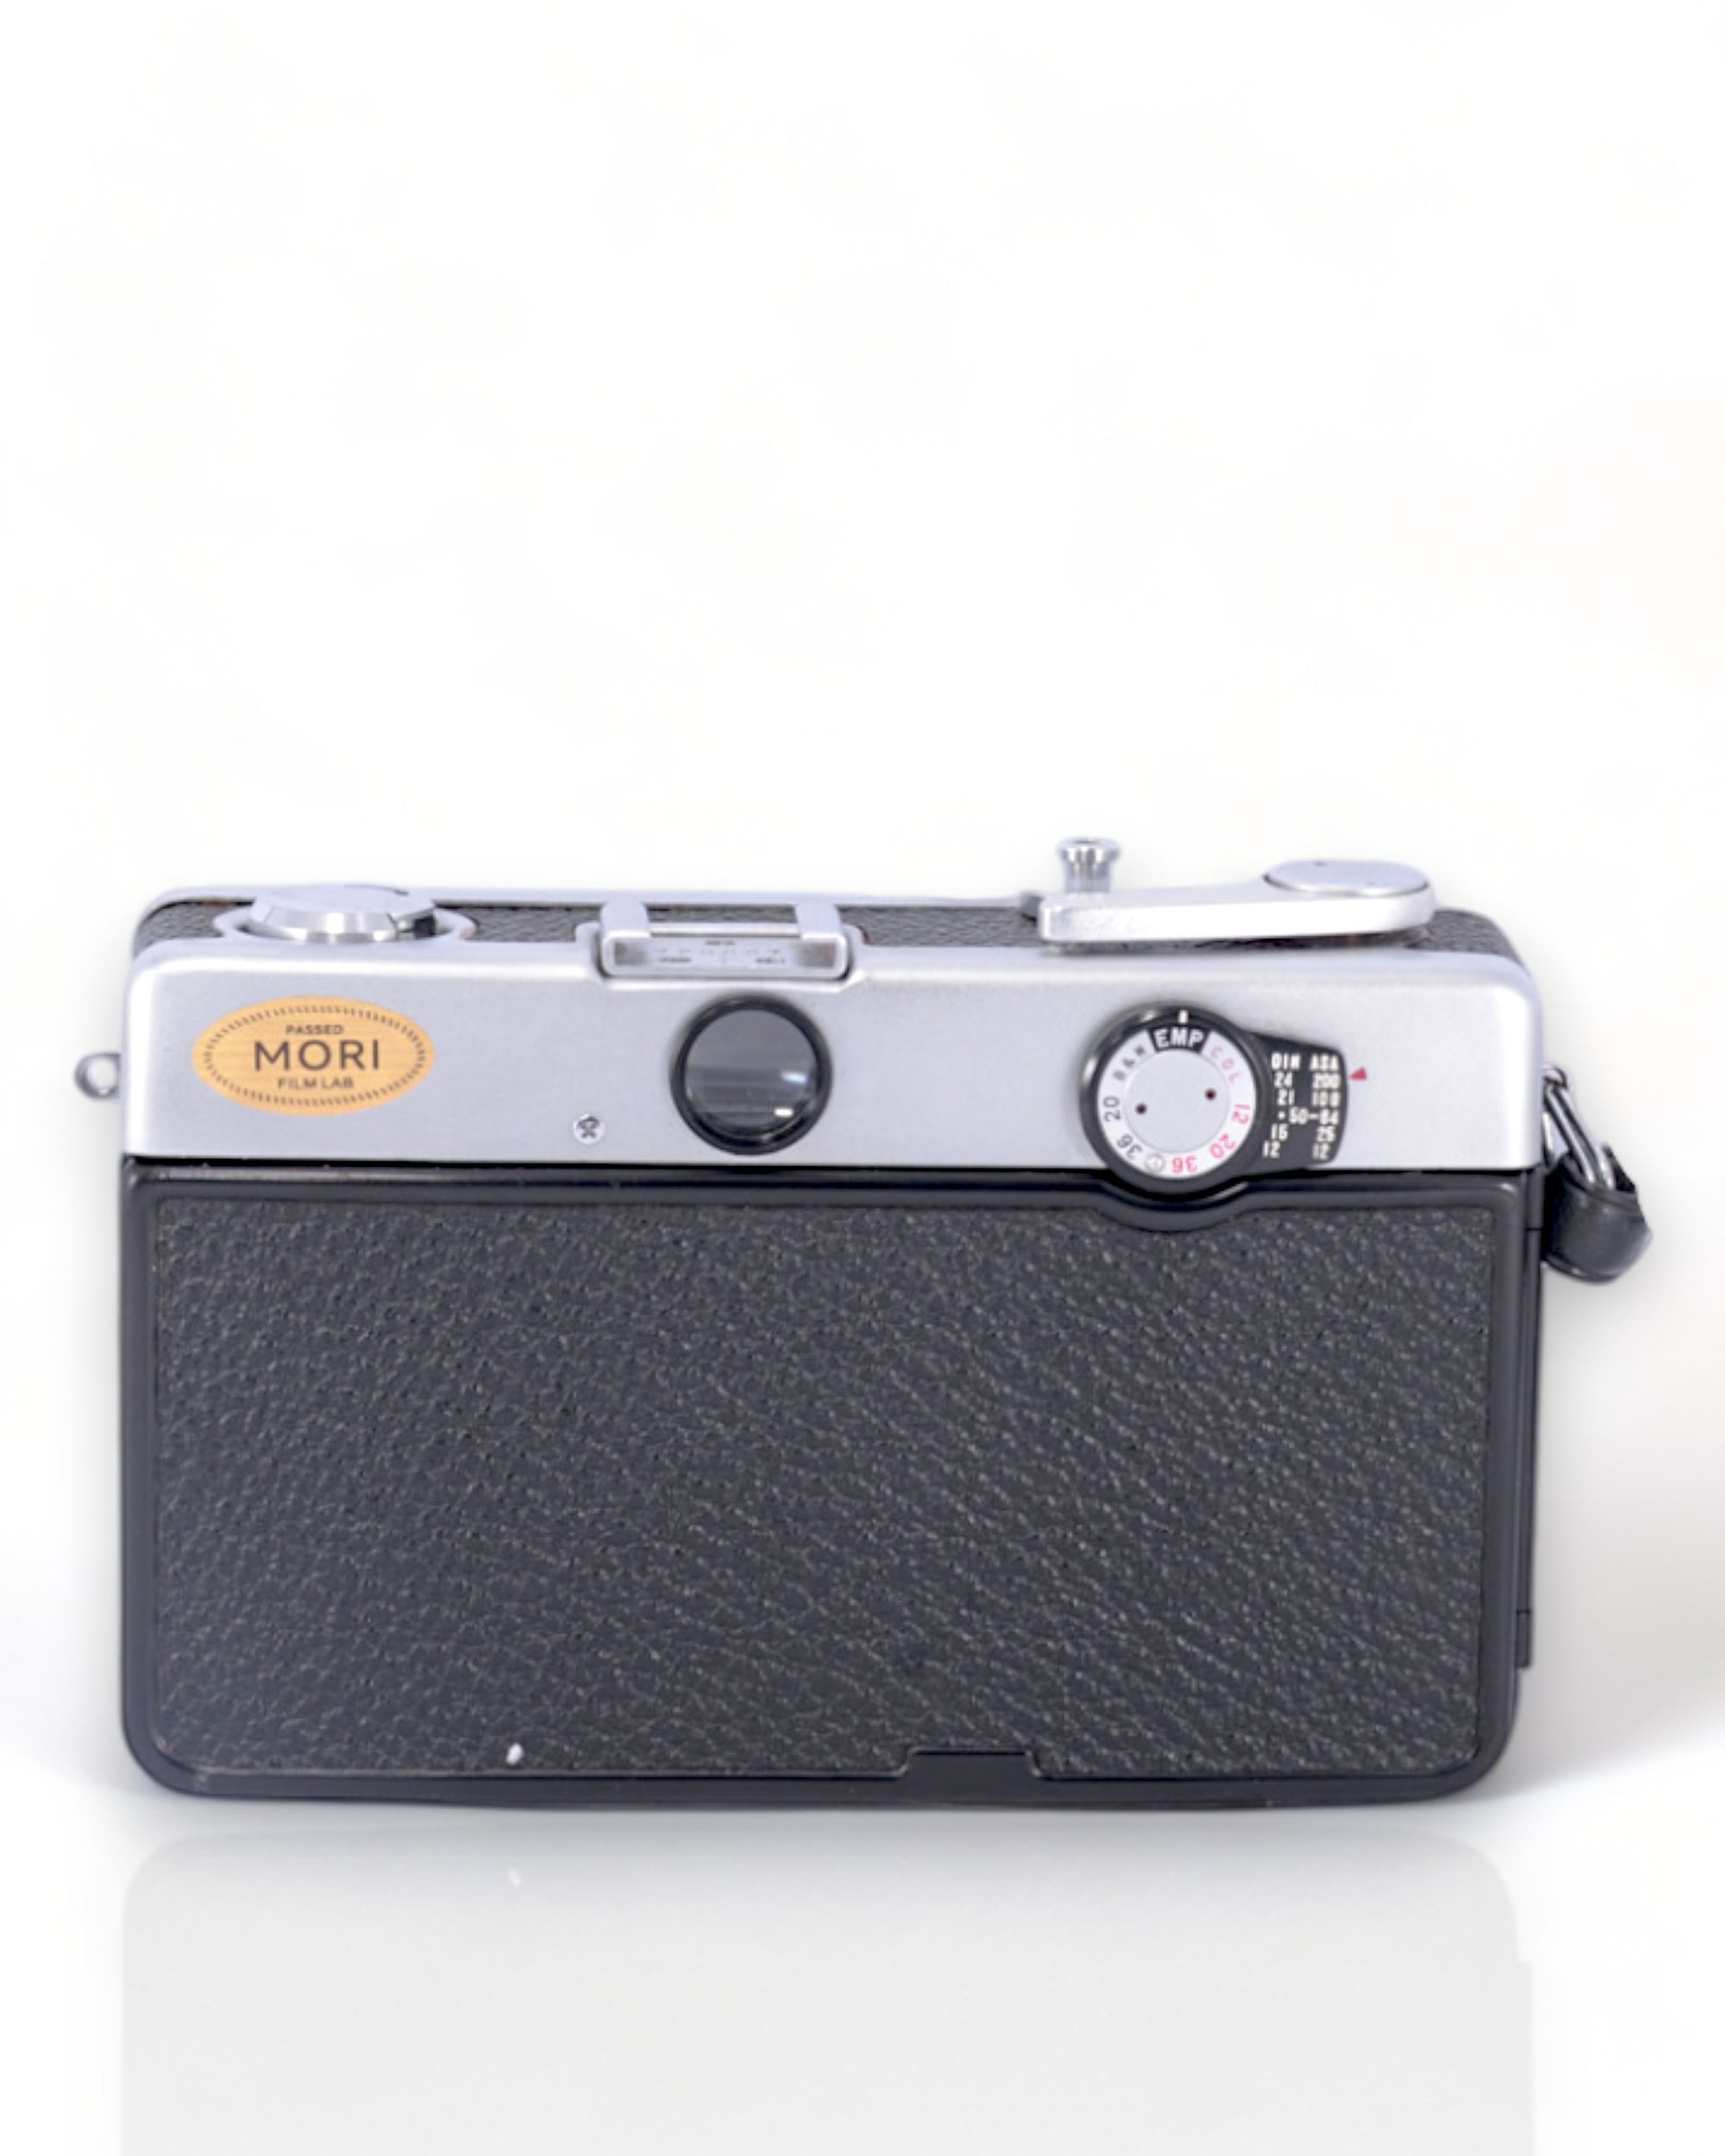 Fujica Compact 35 35mm Point and Shoot Film Camera with 38mm f2.8 Lens